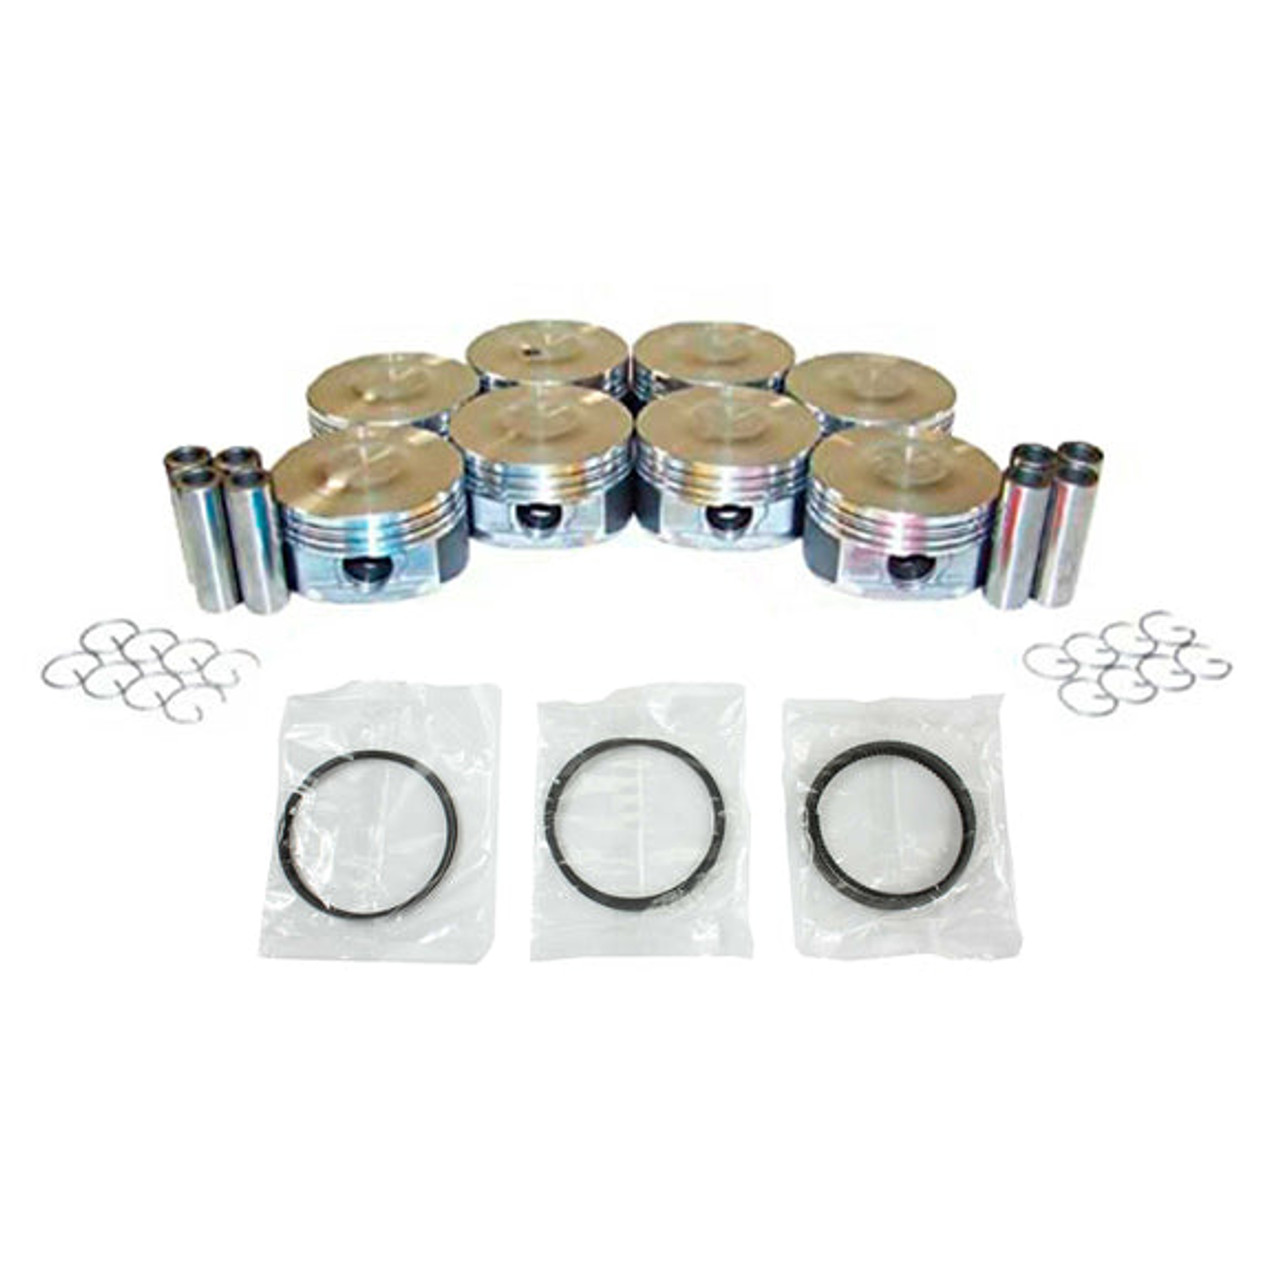 Piston Set with Rings - 2008 Buick Lucerne 4.6L Engine Parts # PRK3164ZE5